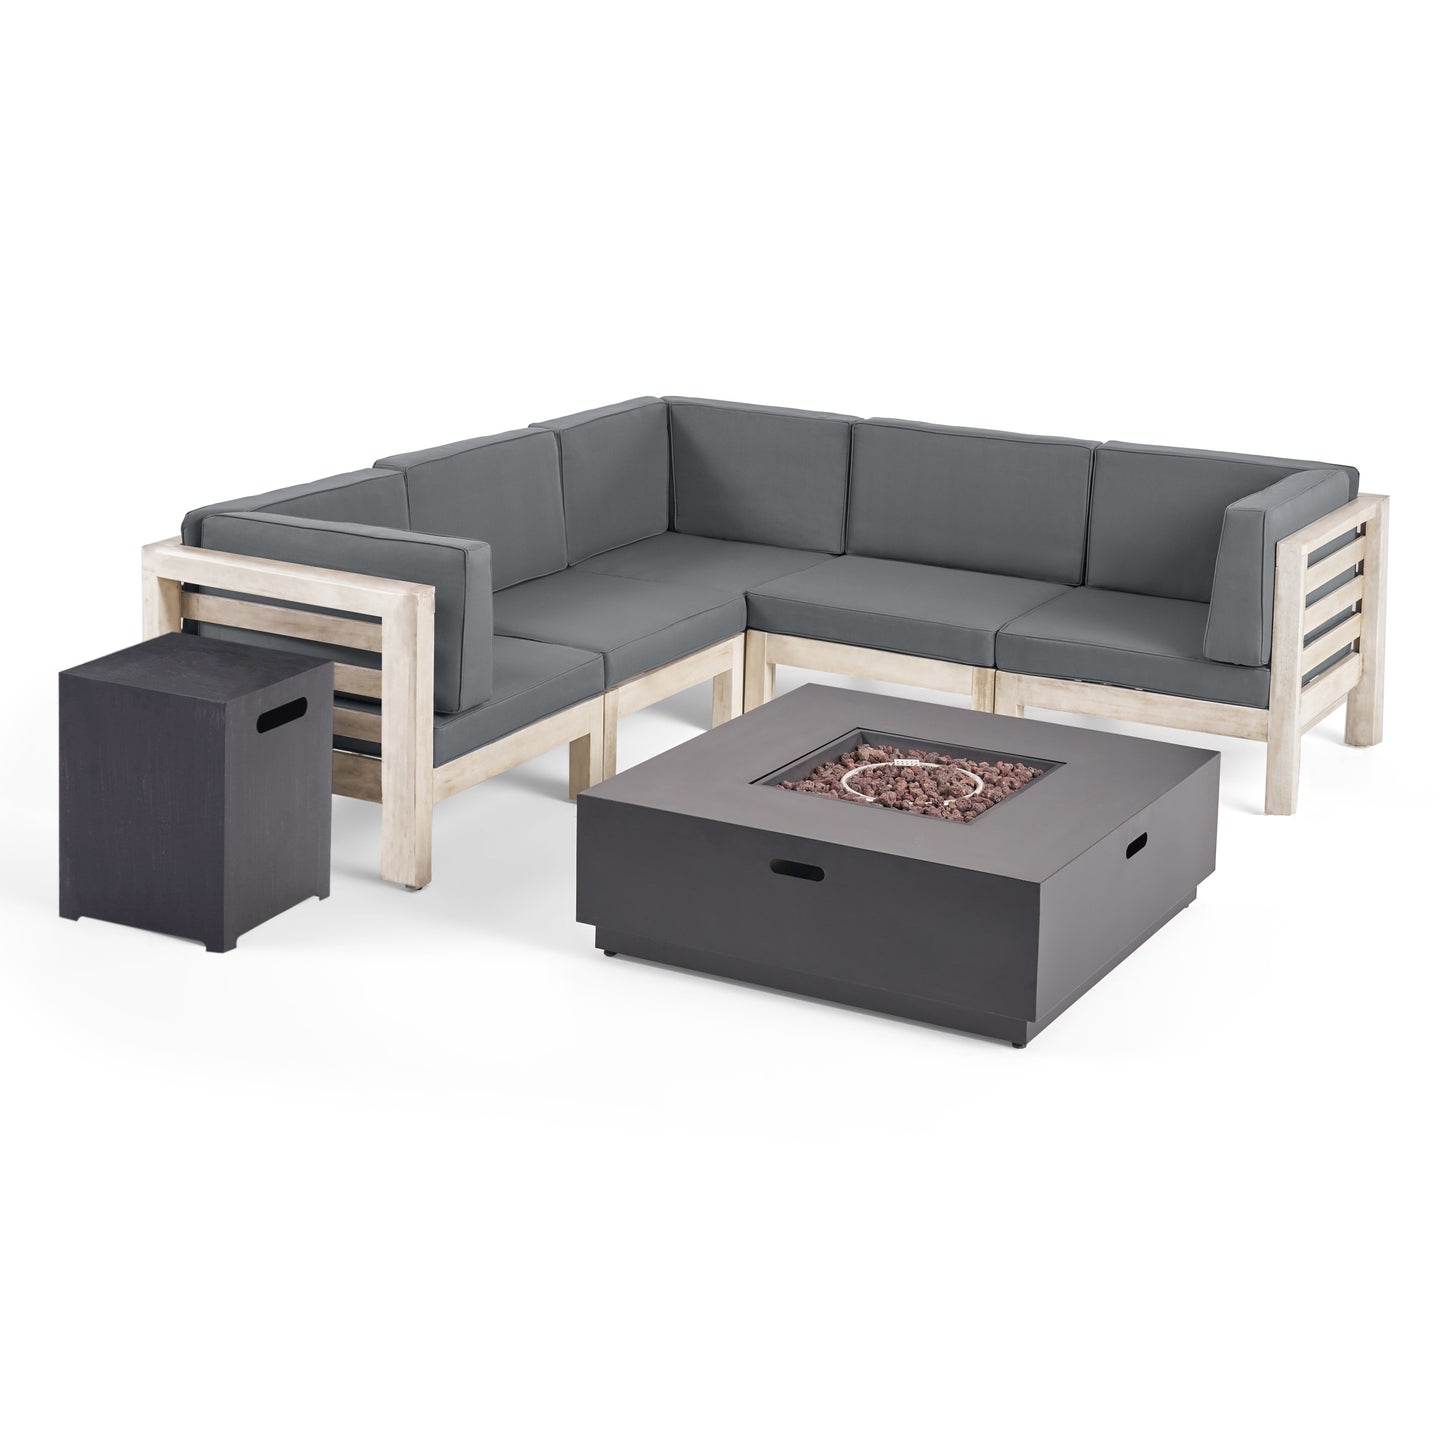 Krystin Outdoor V-Shaped Sectional Sofa Set with Fire Pit